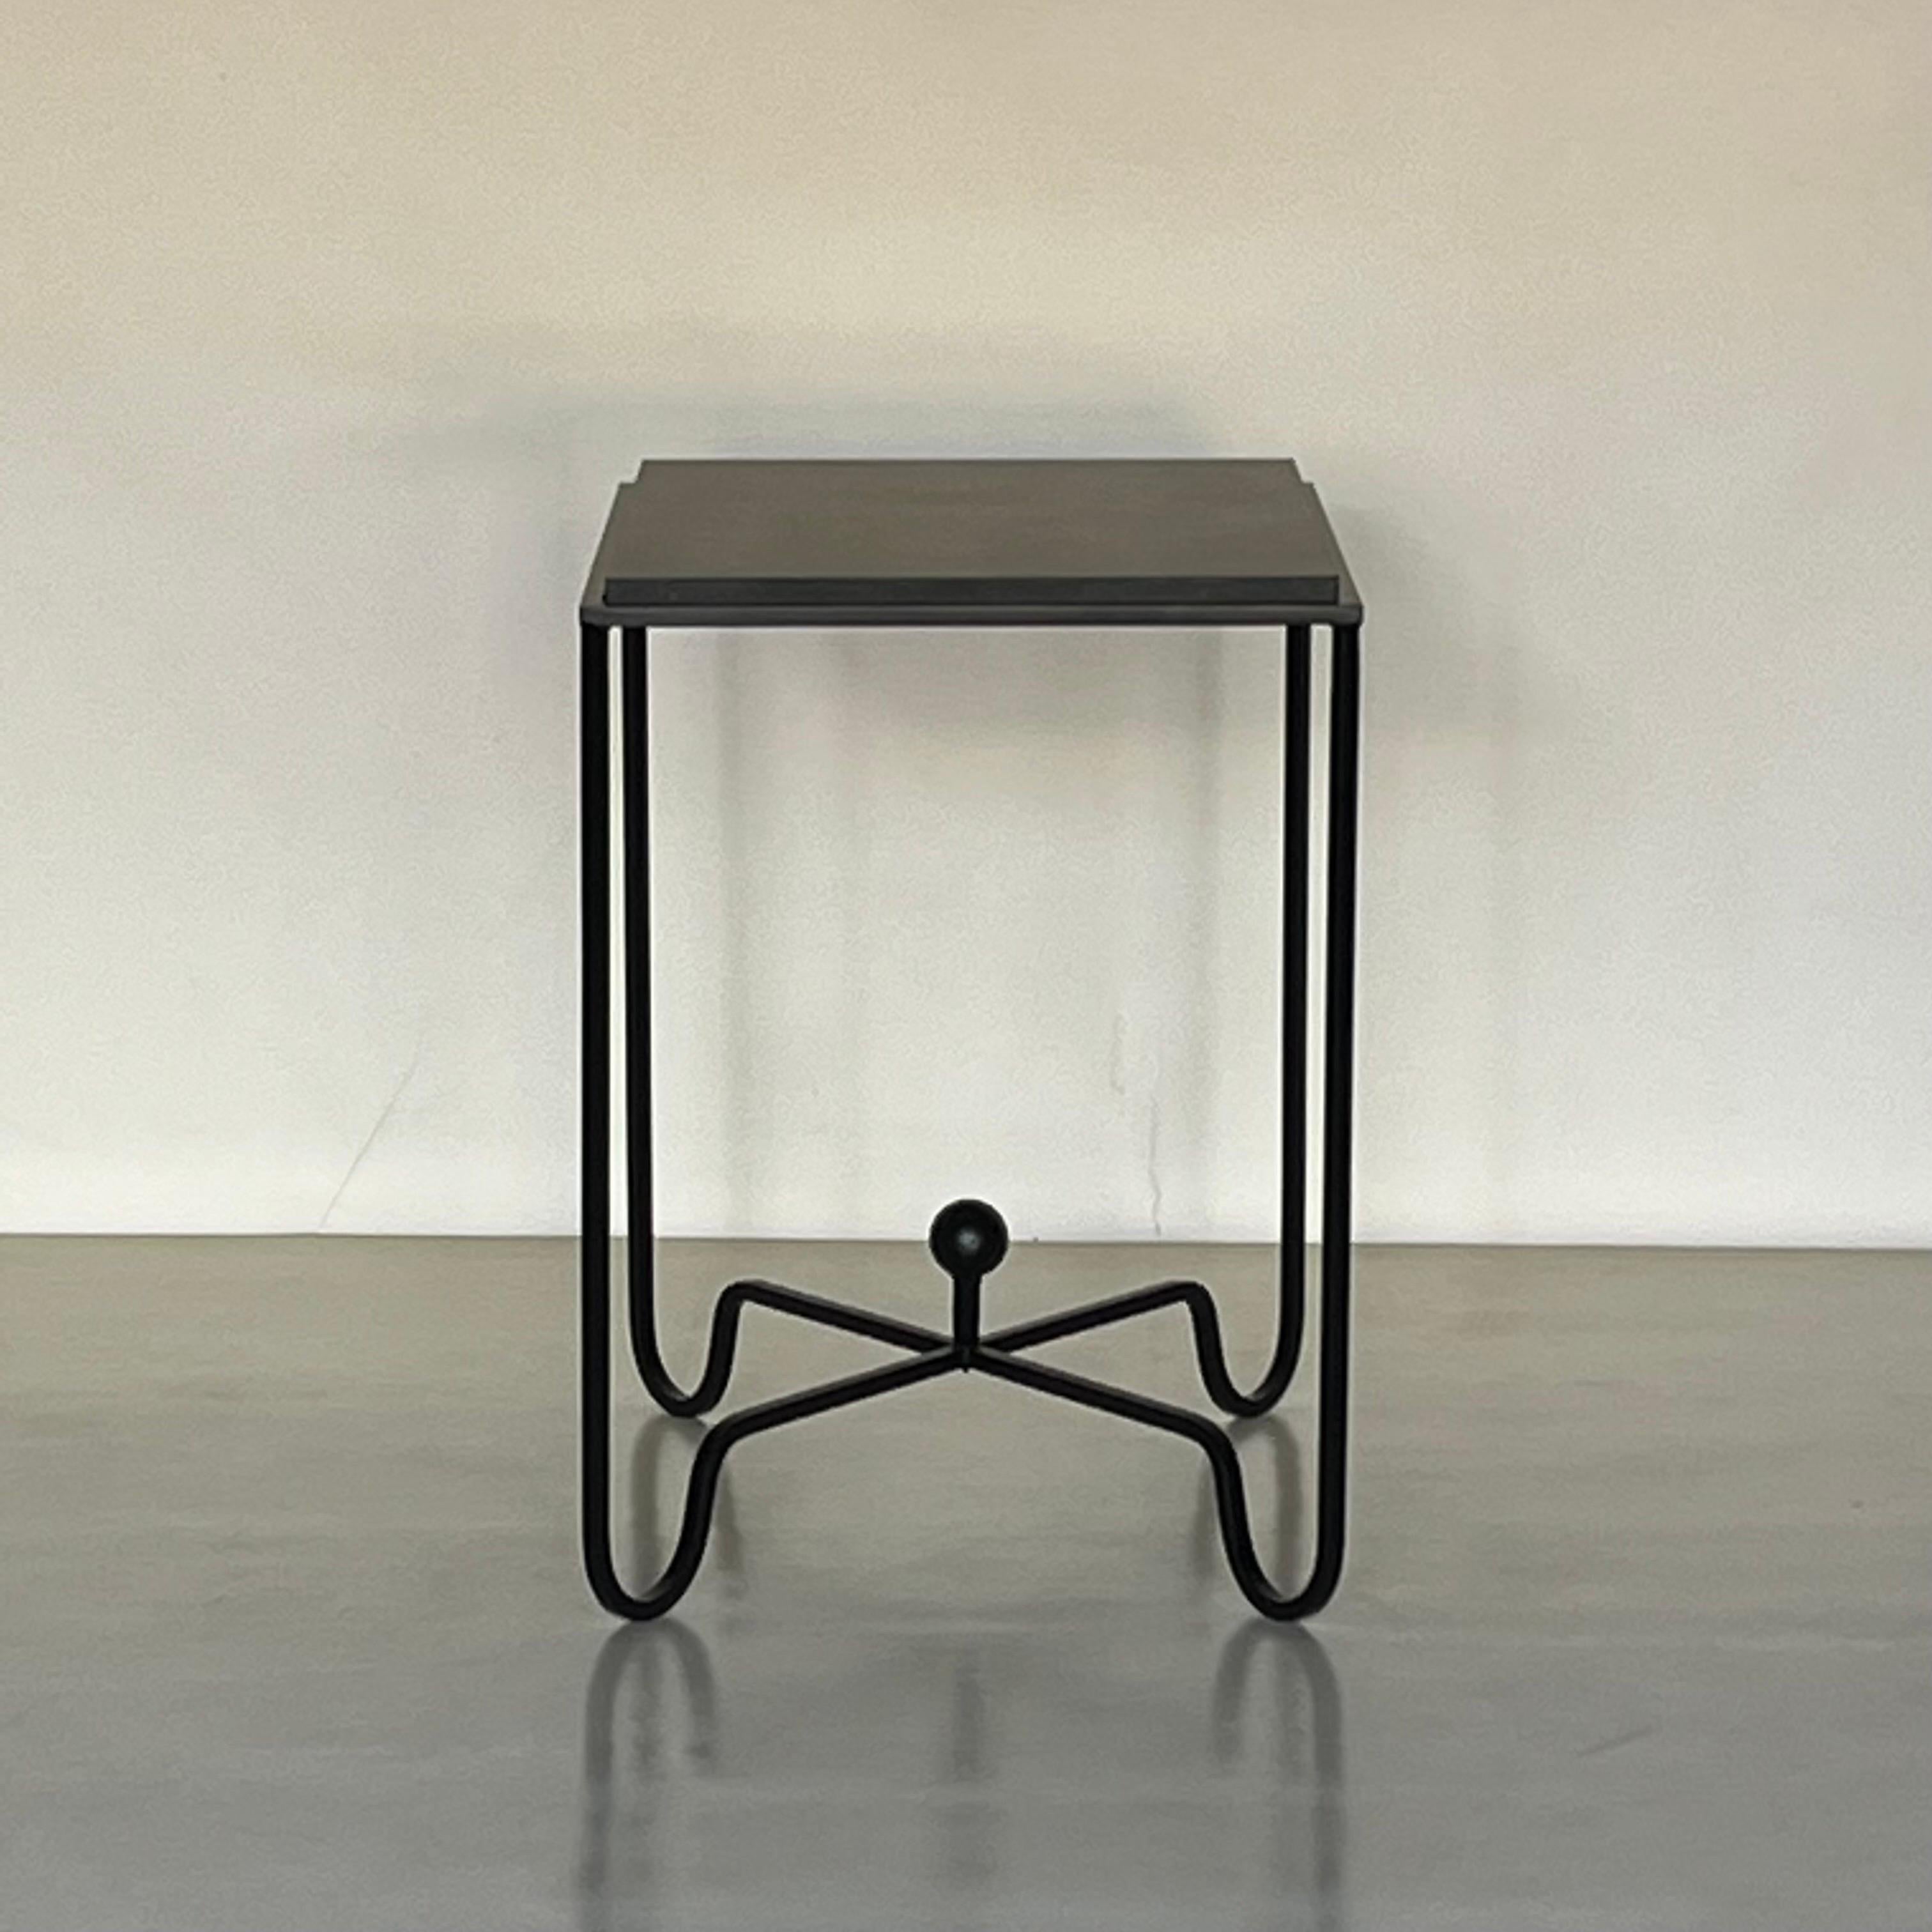 Polished Black Limestone Entretoise side tables or small nightstands by Design Frères For Sale